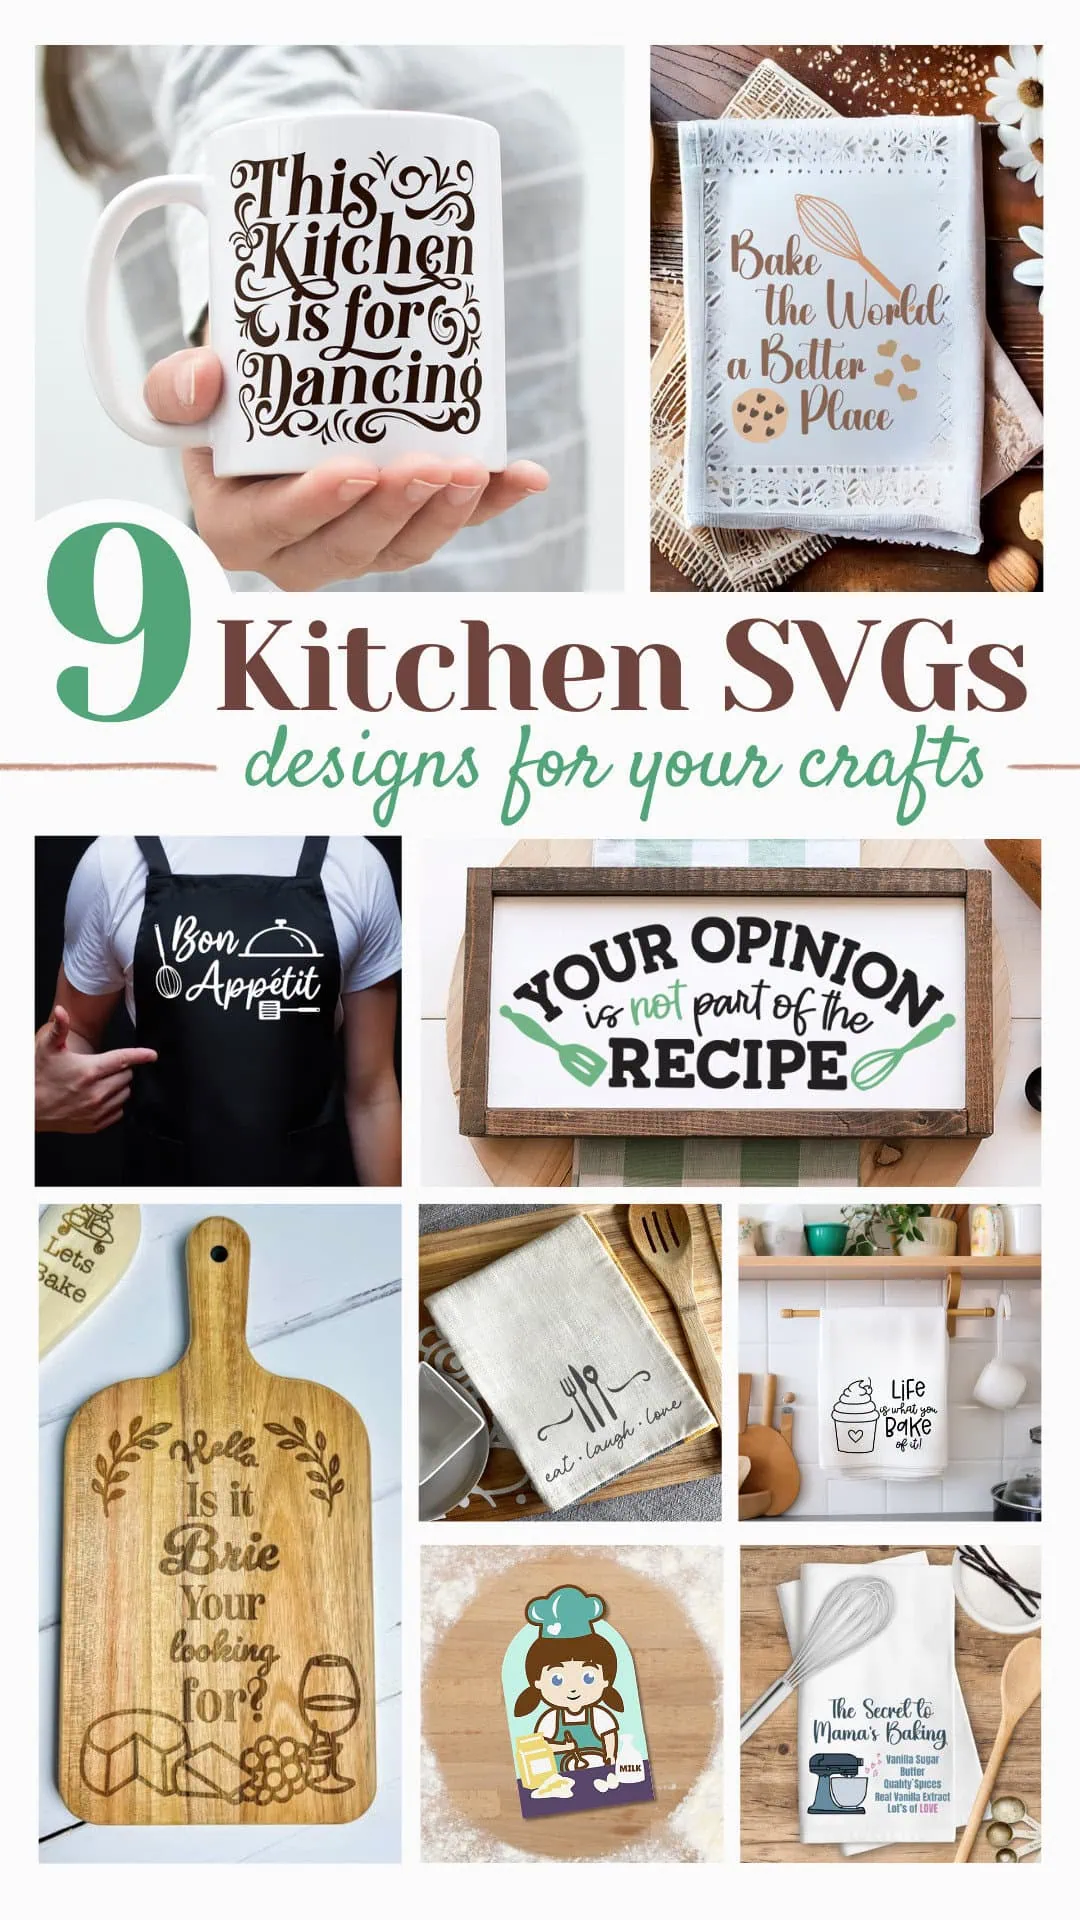 Create custom signs, towels and gifts with kitchen SVG files